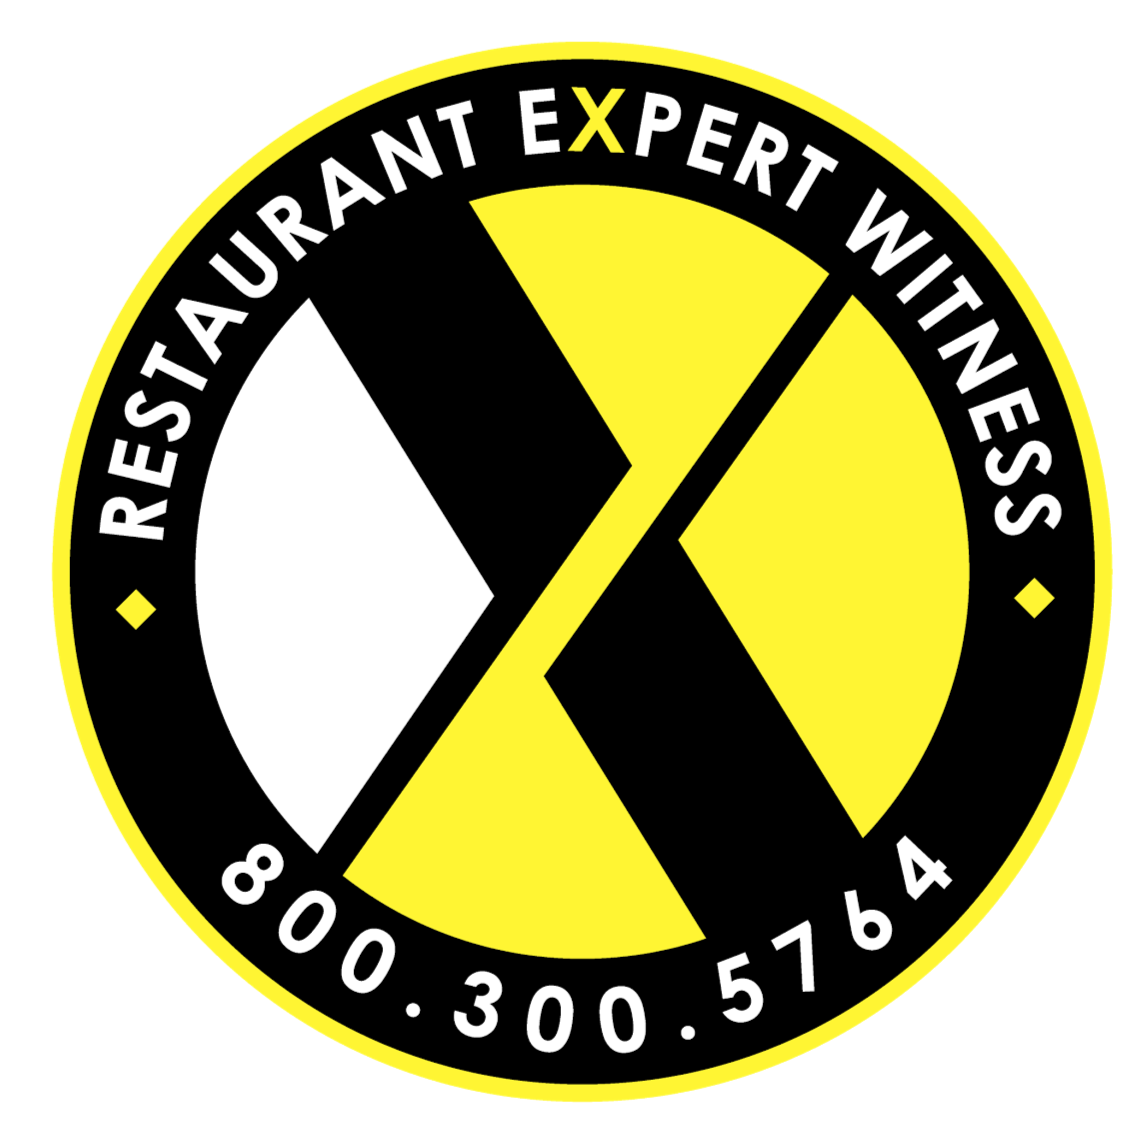 Restaurant Expert Witness - Restaurant Consulting for accident investigation, legal services